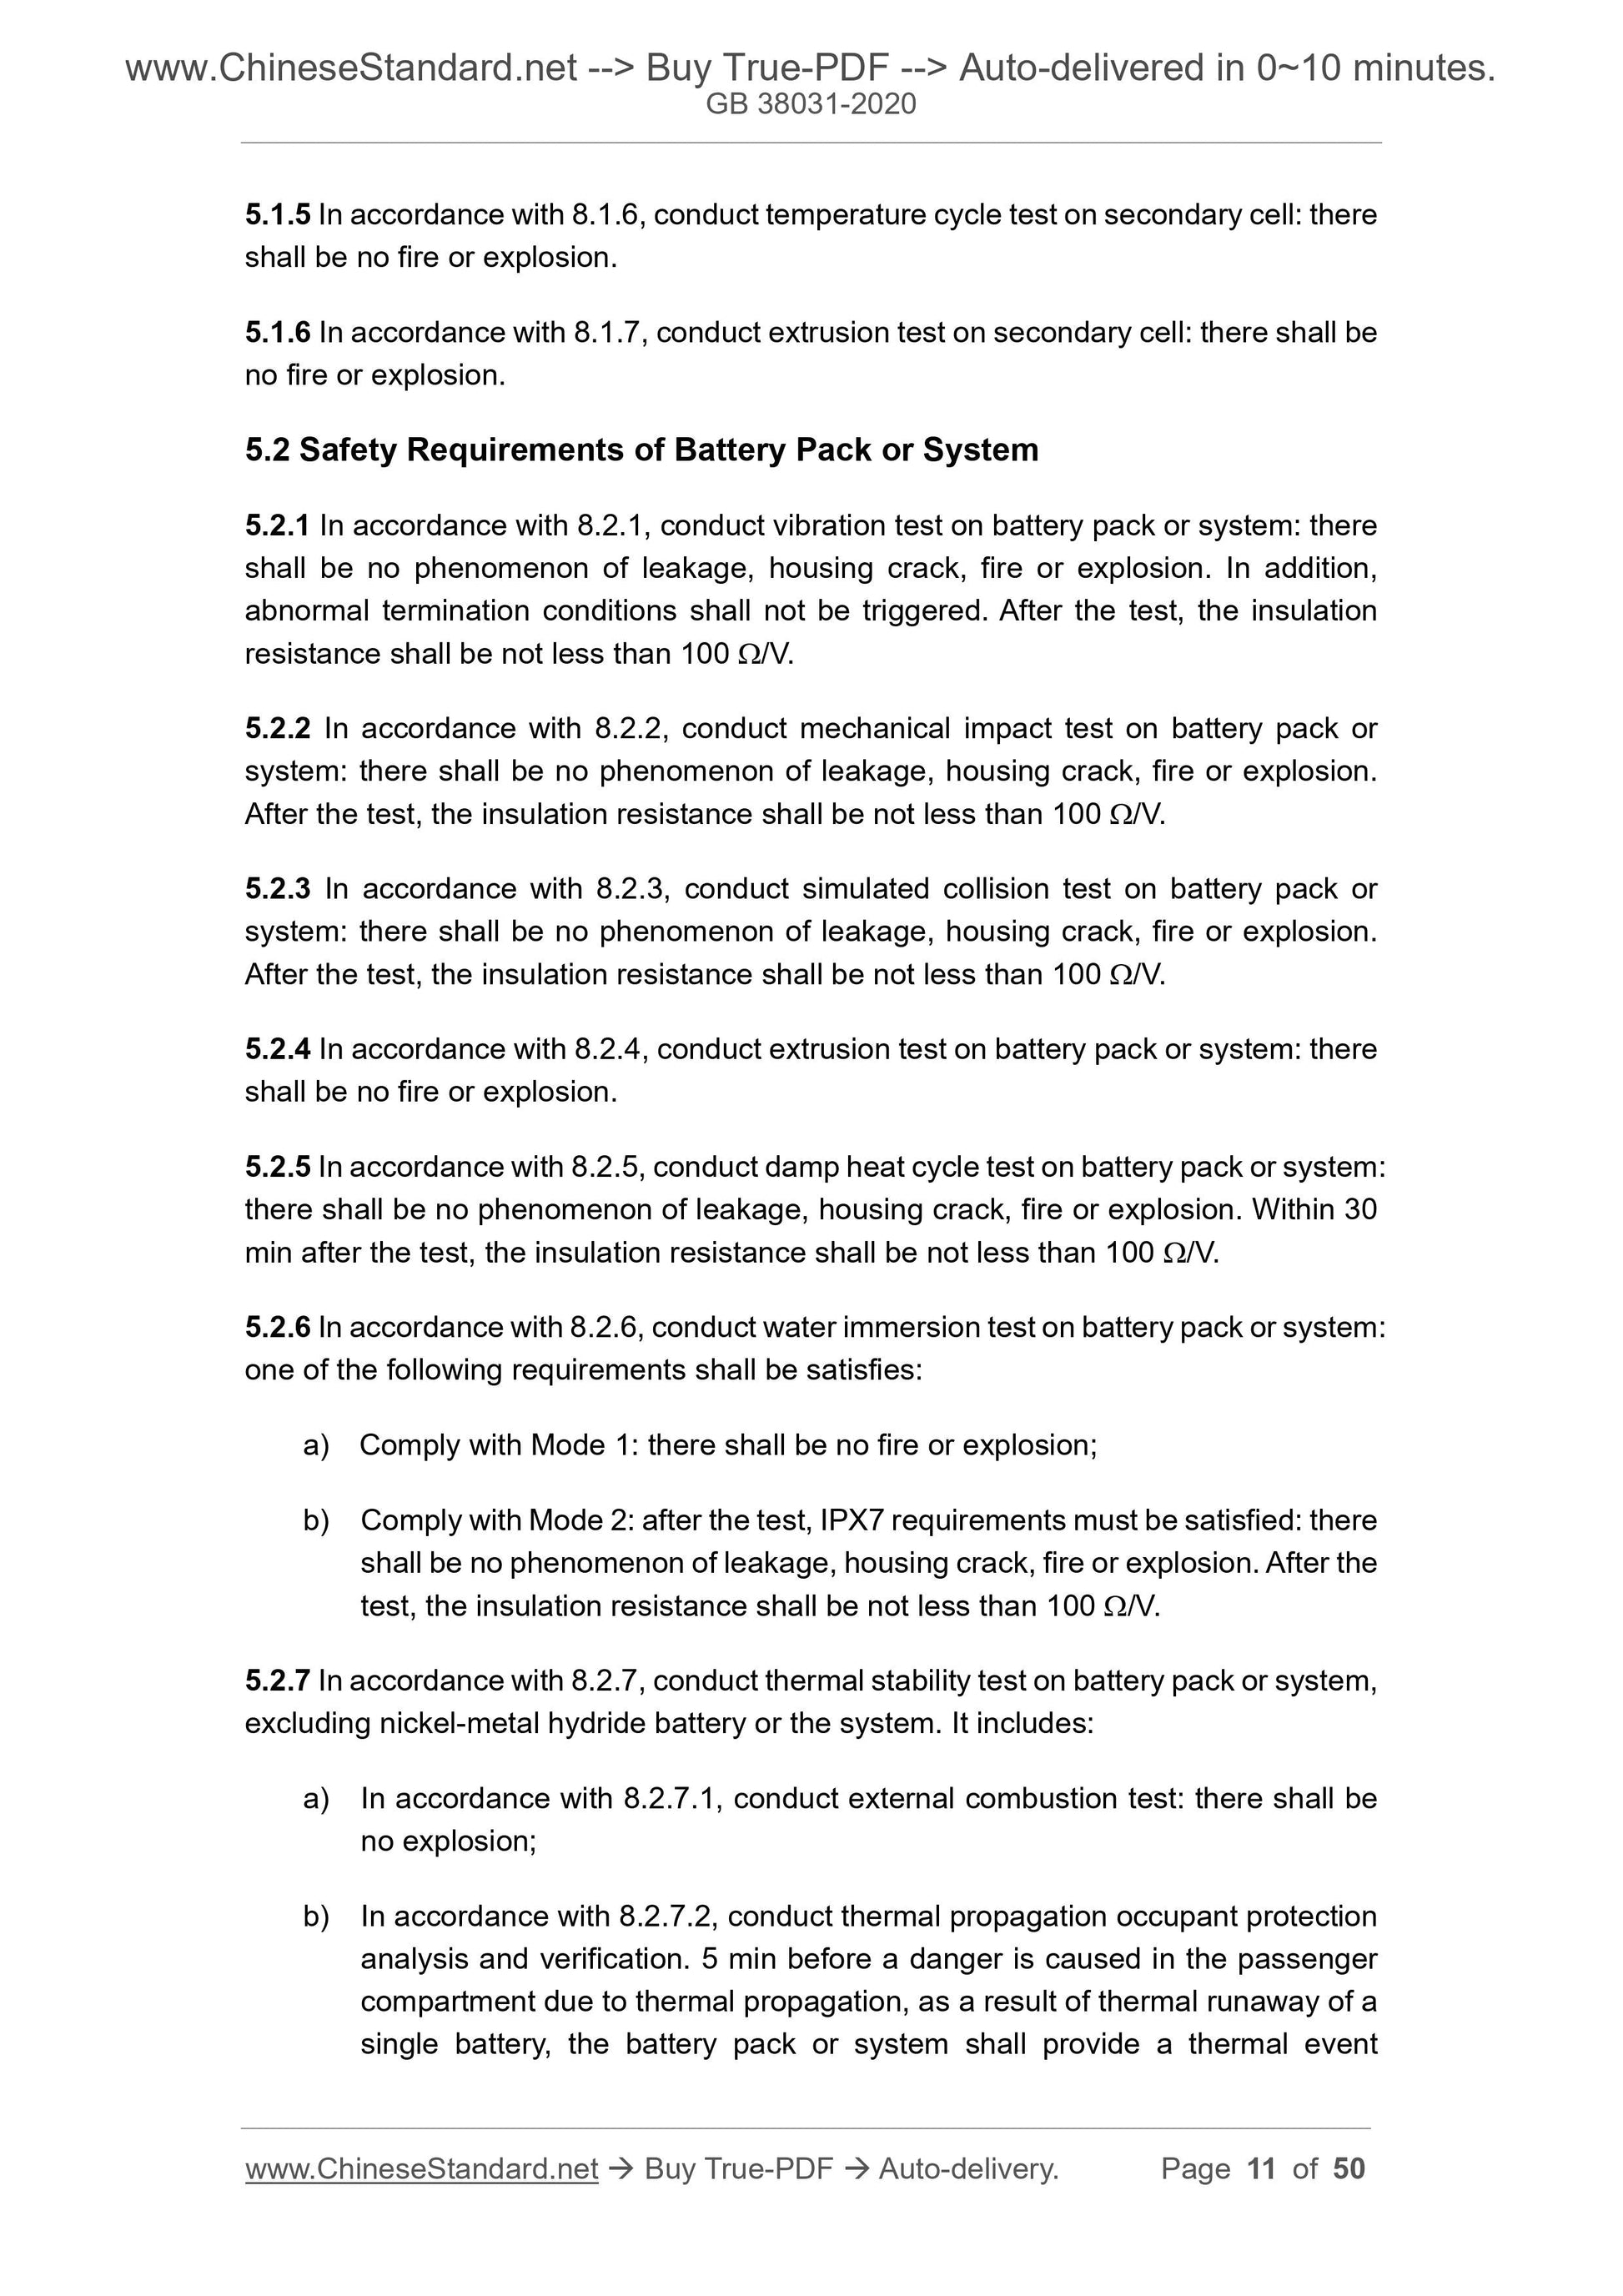 GB 38031-2020 Page 5